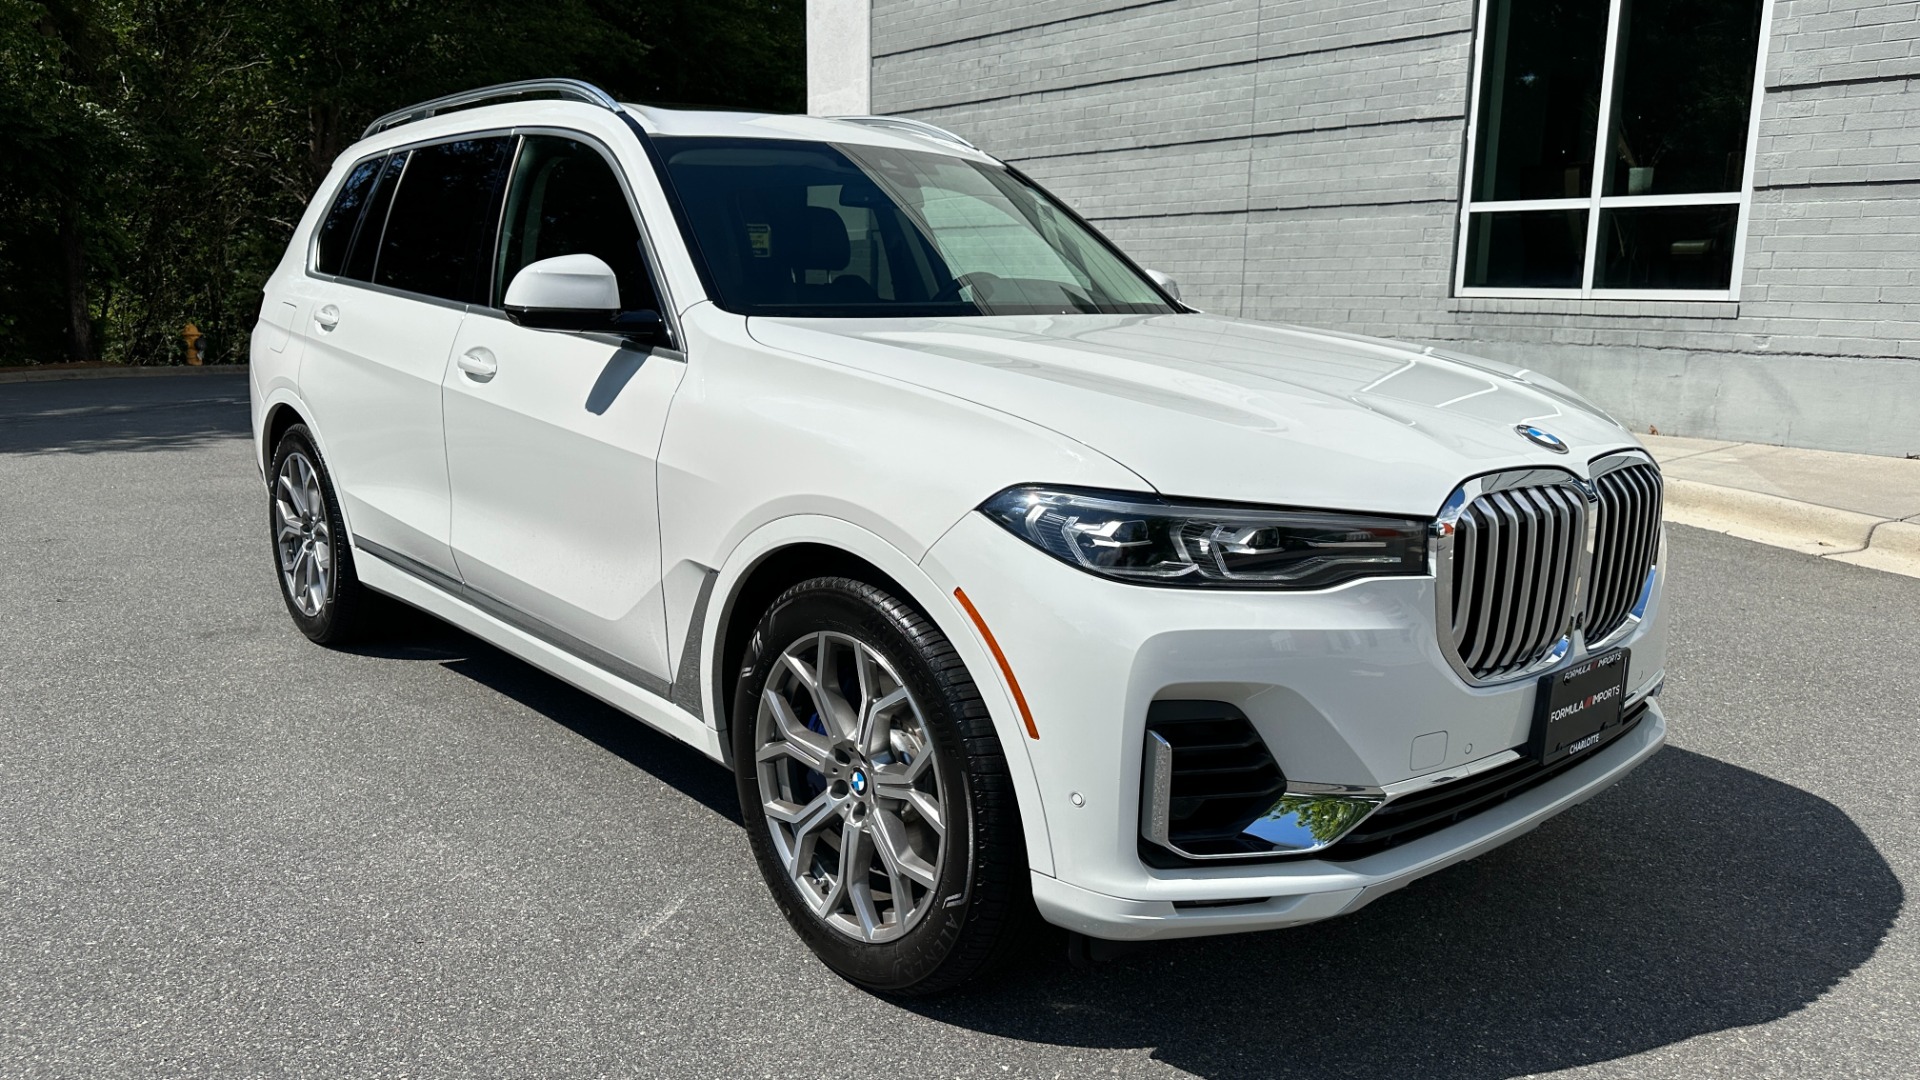 Used 2020 BMW X7 xDrive40i / HK SOUND / COLD WEATHER / REMOTE START / M SPORT BRAKES for sale $55,995 at Formula Imports in Charlotte NC 28227 2